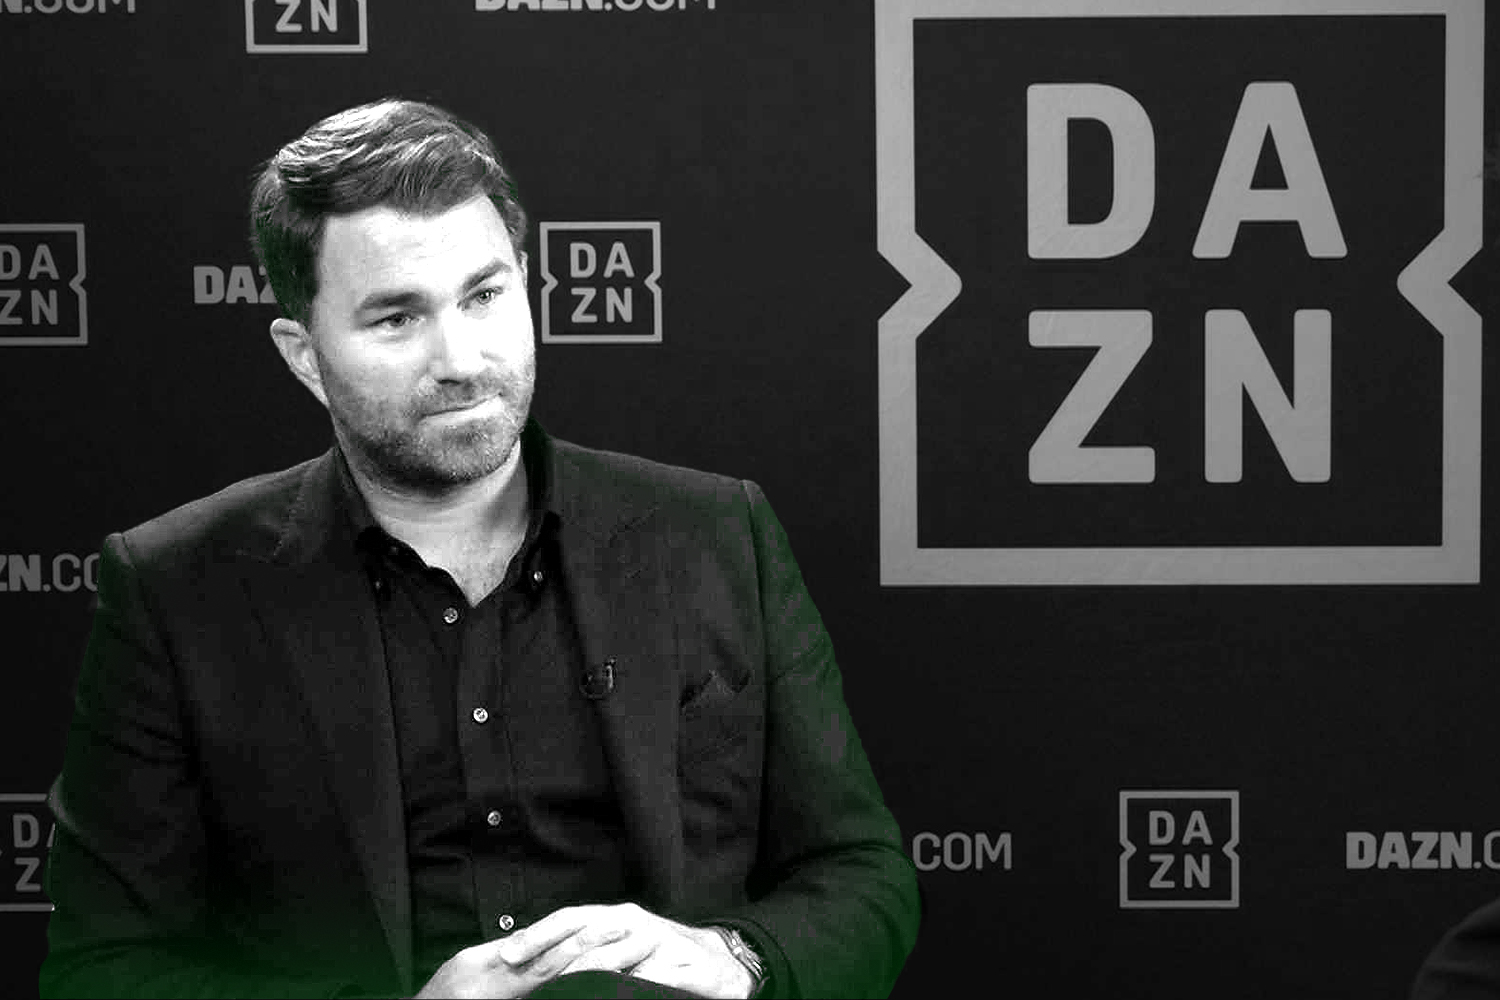 Dazn And Matchroom Ink 5 Year Broadcast Deal